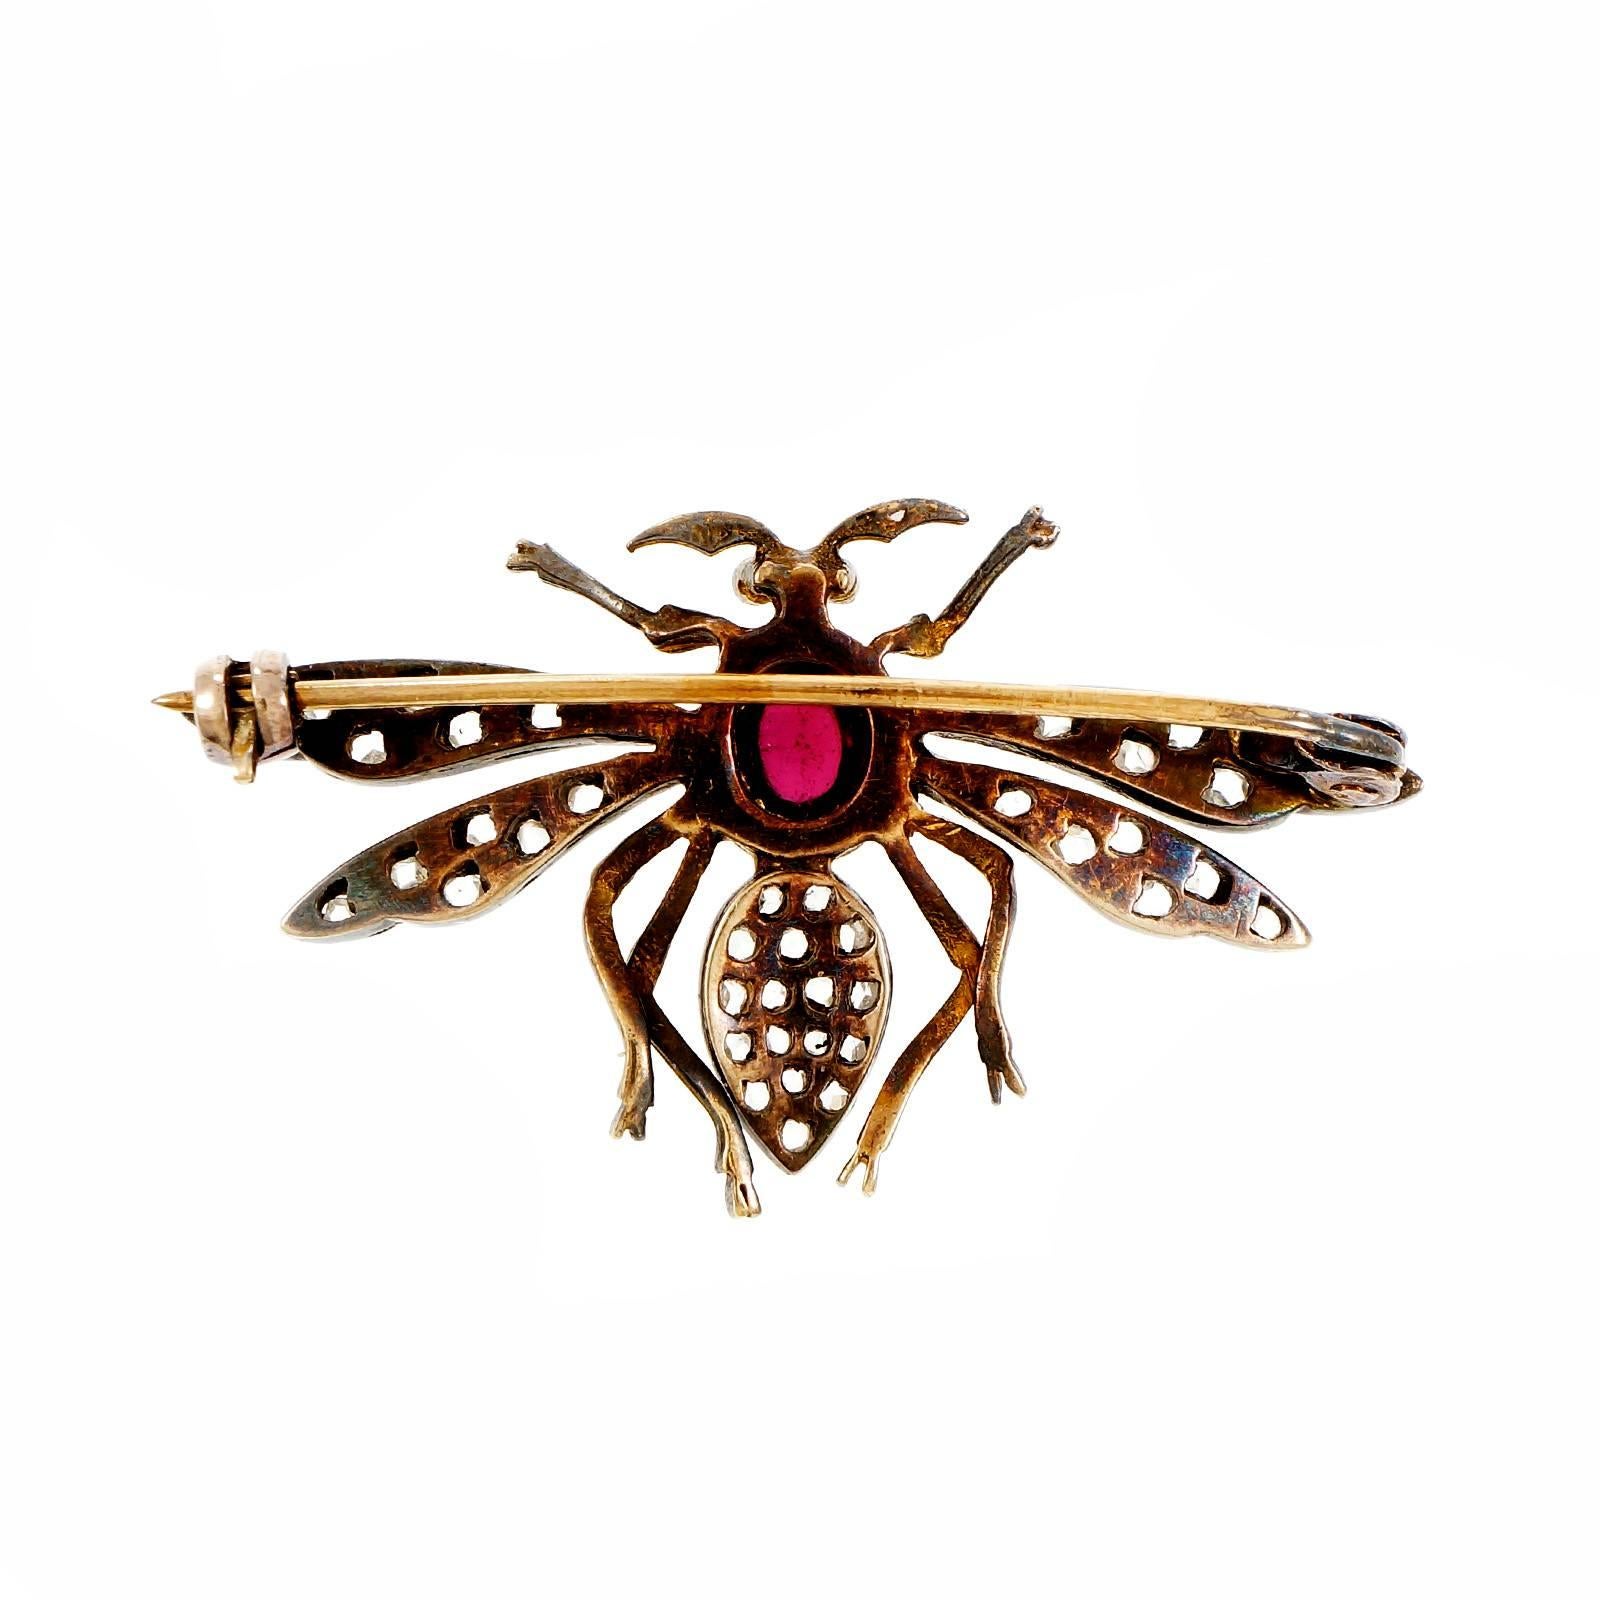 Victorian 1900 wasp pin in 14k yellow gold with natural patina and silver top set with rose cut diamonds and a cabochon Garnet.

1 oval cabochon brownish red Garnet, approx. total weight 1.00cts, 7 x 5.5mm
41 rose cut diamonds, approx. total